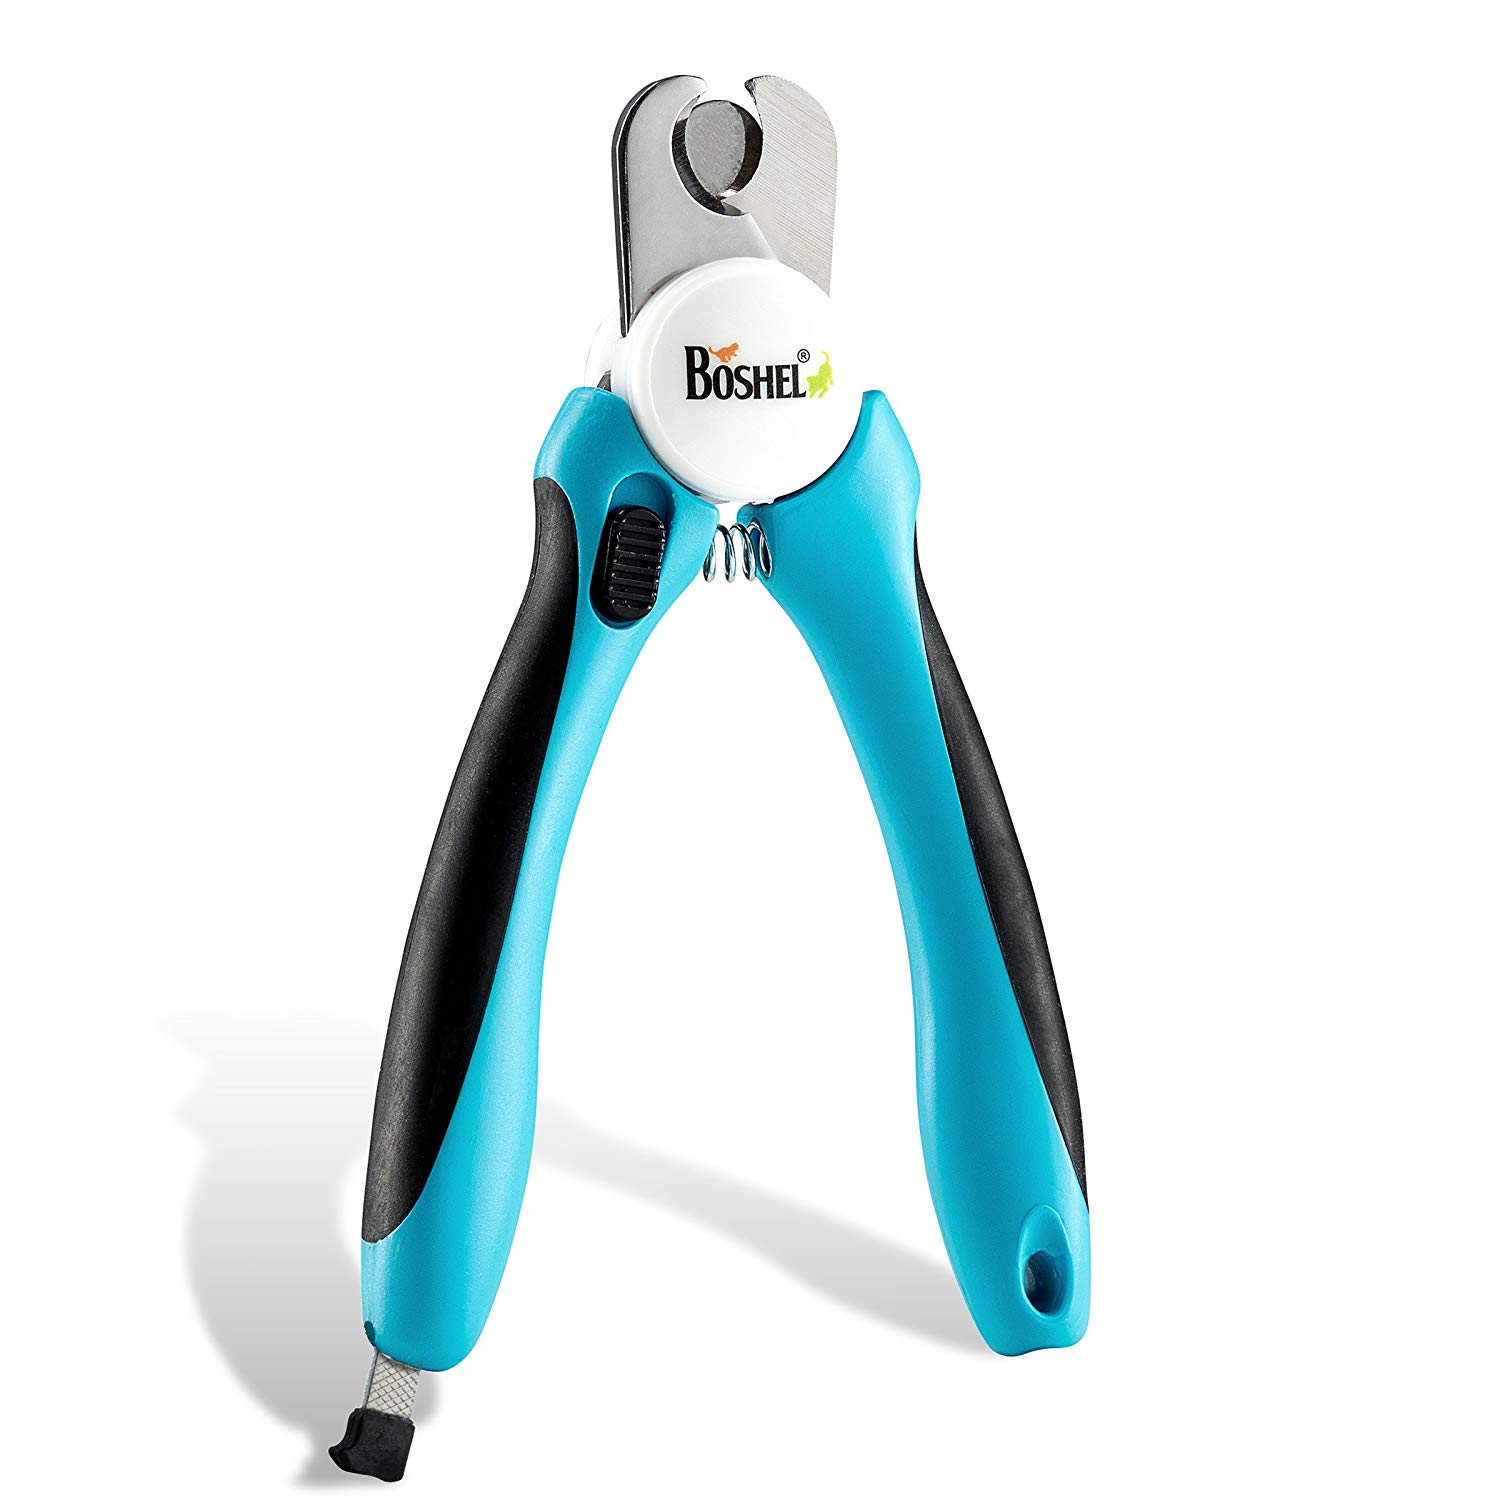 BOSHEL Dog Nail Clippers and Trimmer with Safety Guard to Avoid over-Cutting Nails & Free Nail File, Blue - image 1 of 9